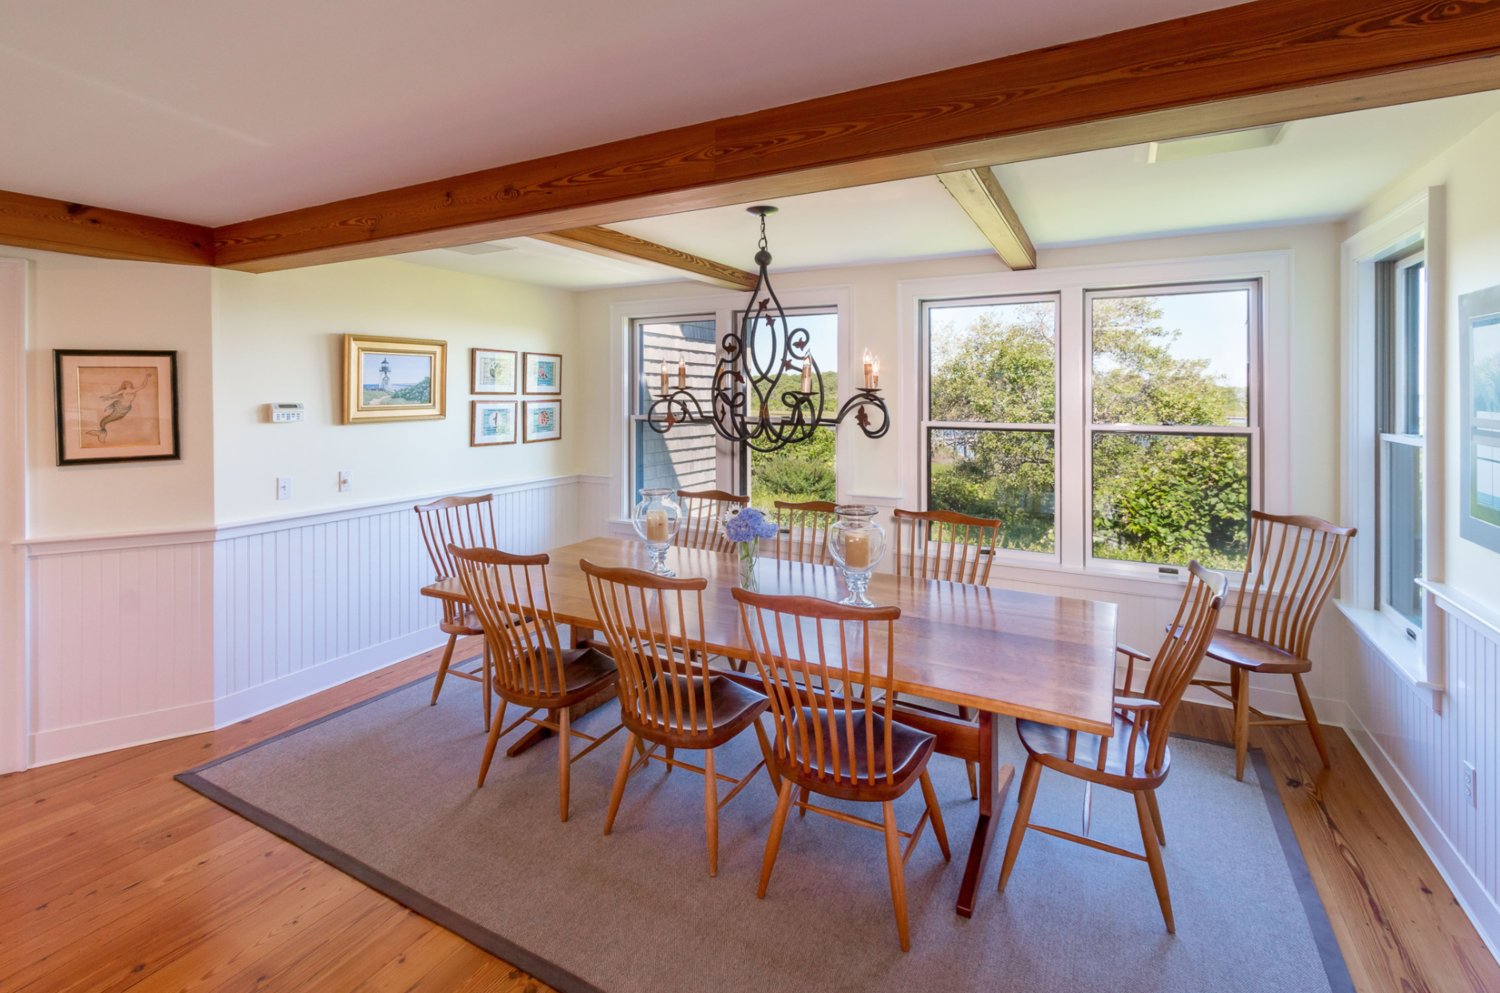 The dining area has an exposed-beam ceiling and multiple windows with views of Polpis Harbor.